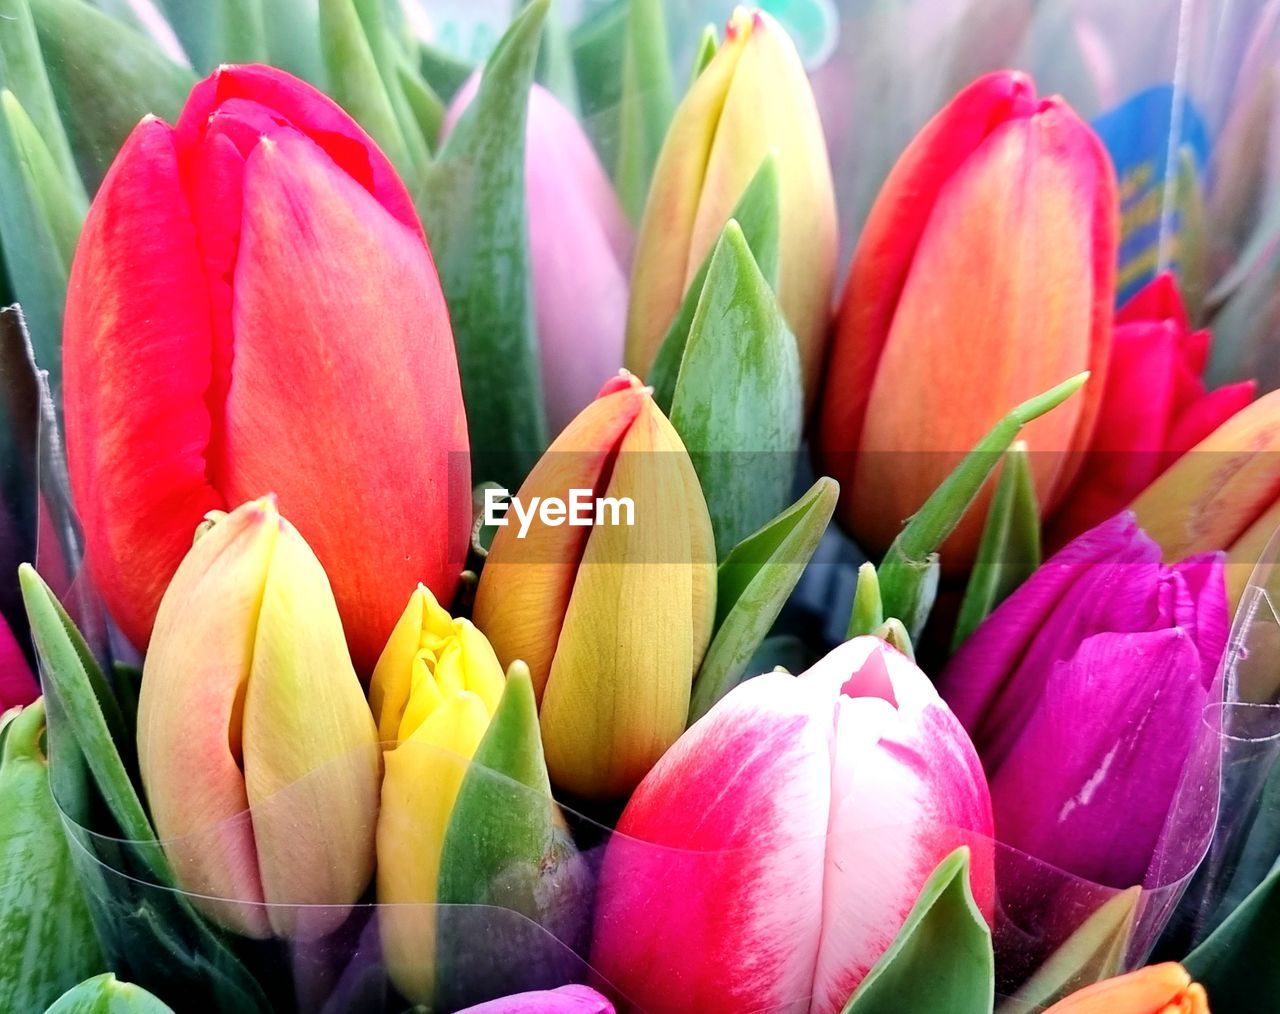 flower, flowering plant, plant, tulip, freshness, beauty in nature, close-up, fragility, multi colored, nature, petal, no people, flower head, pink, inflorescence, growth, leaf, day, plant part, springtime, vibrant color, green, outdoors, abundance, large group of objects, retail, backgrounds